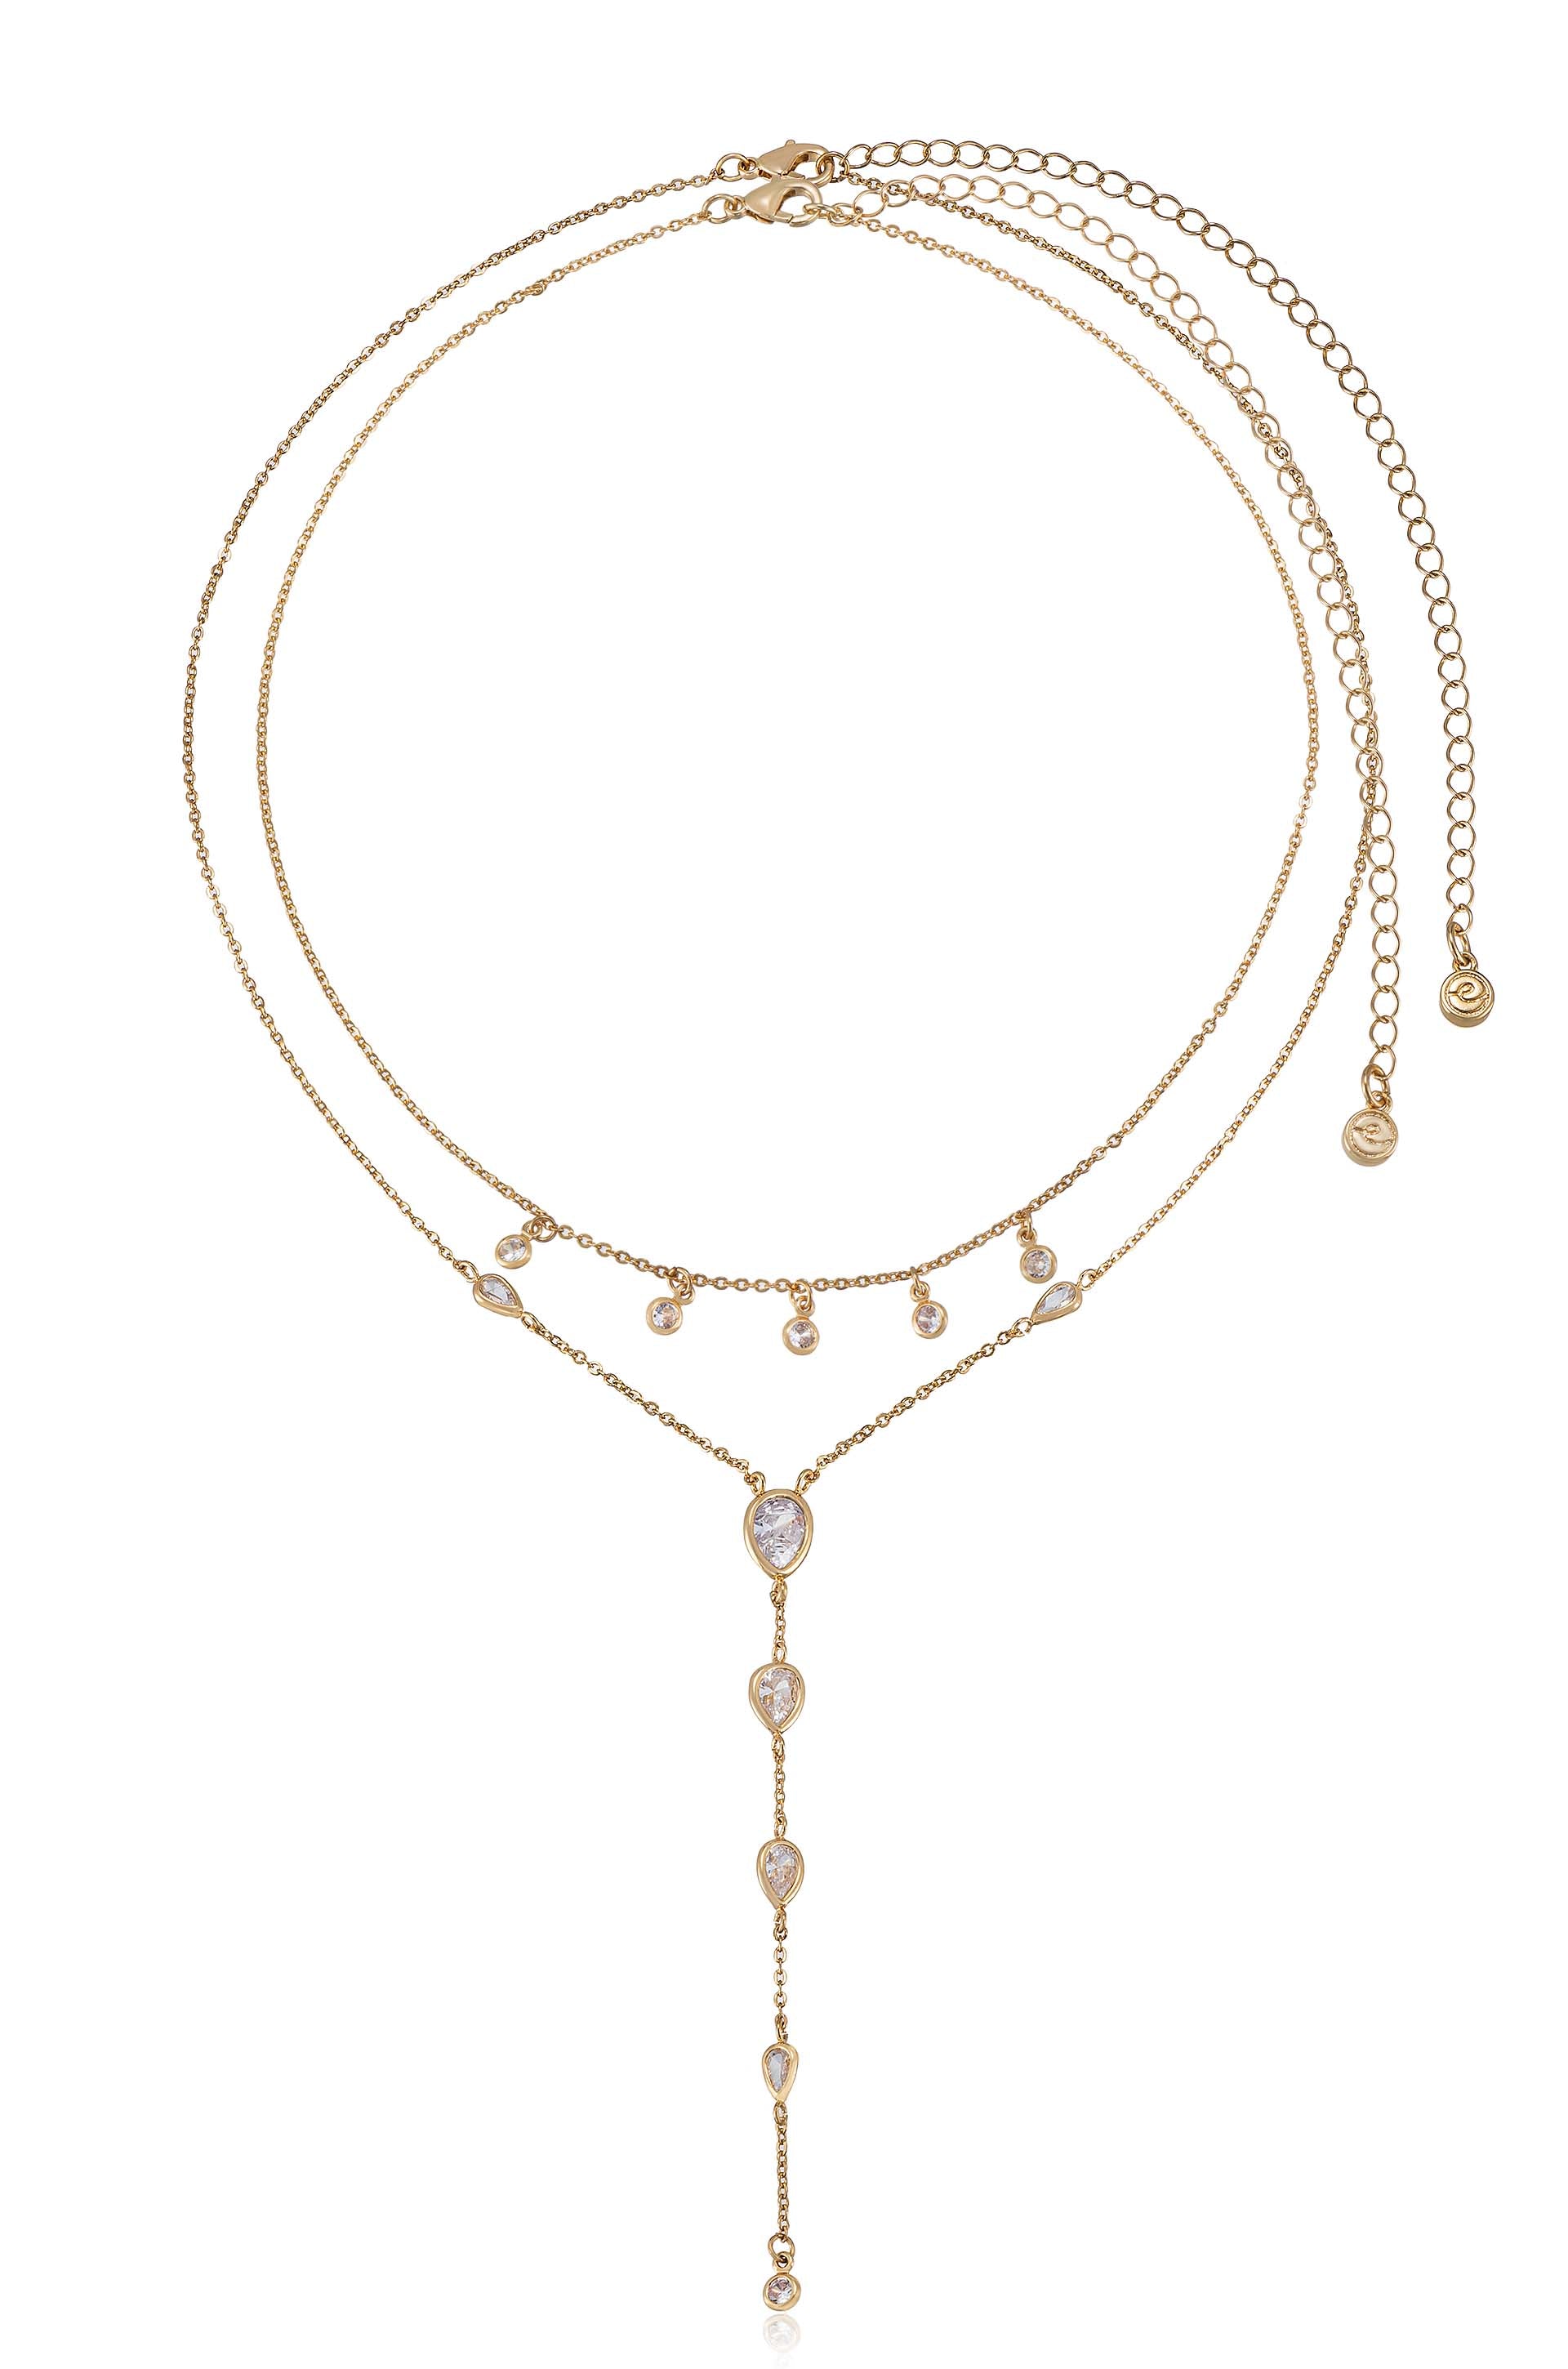 Draped in Bezel Crystal 18k Gold Plated Lariat Necklace Set full